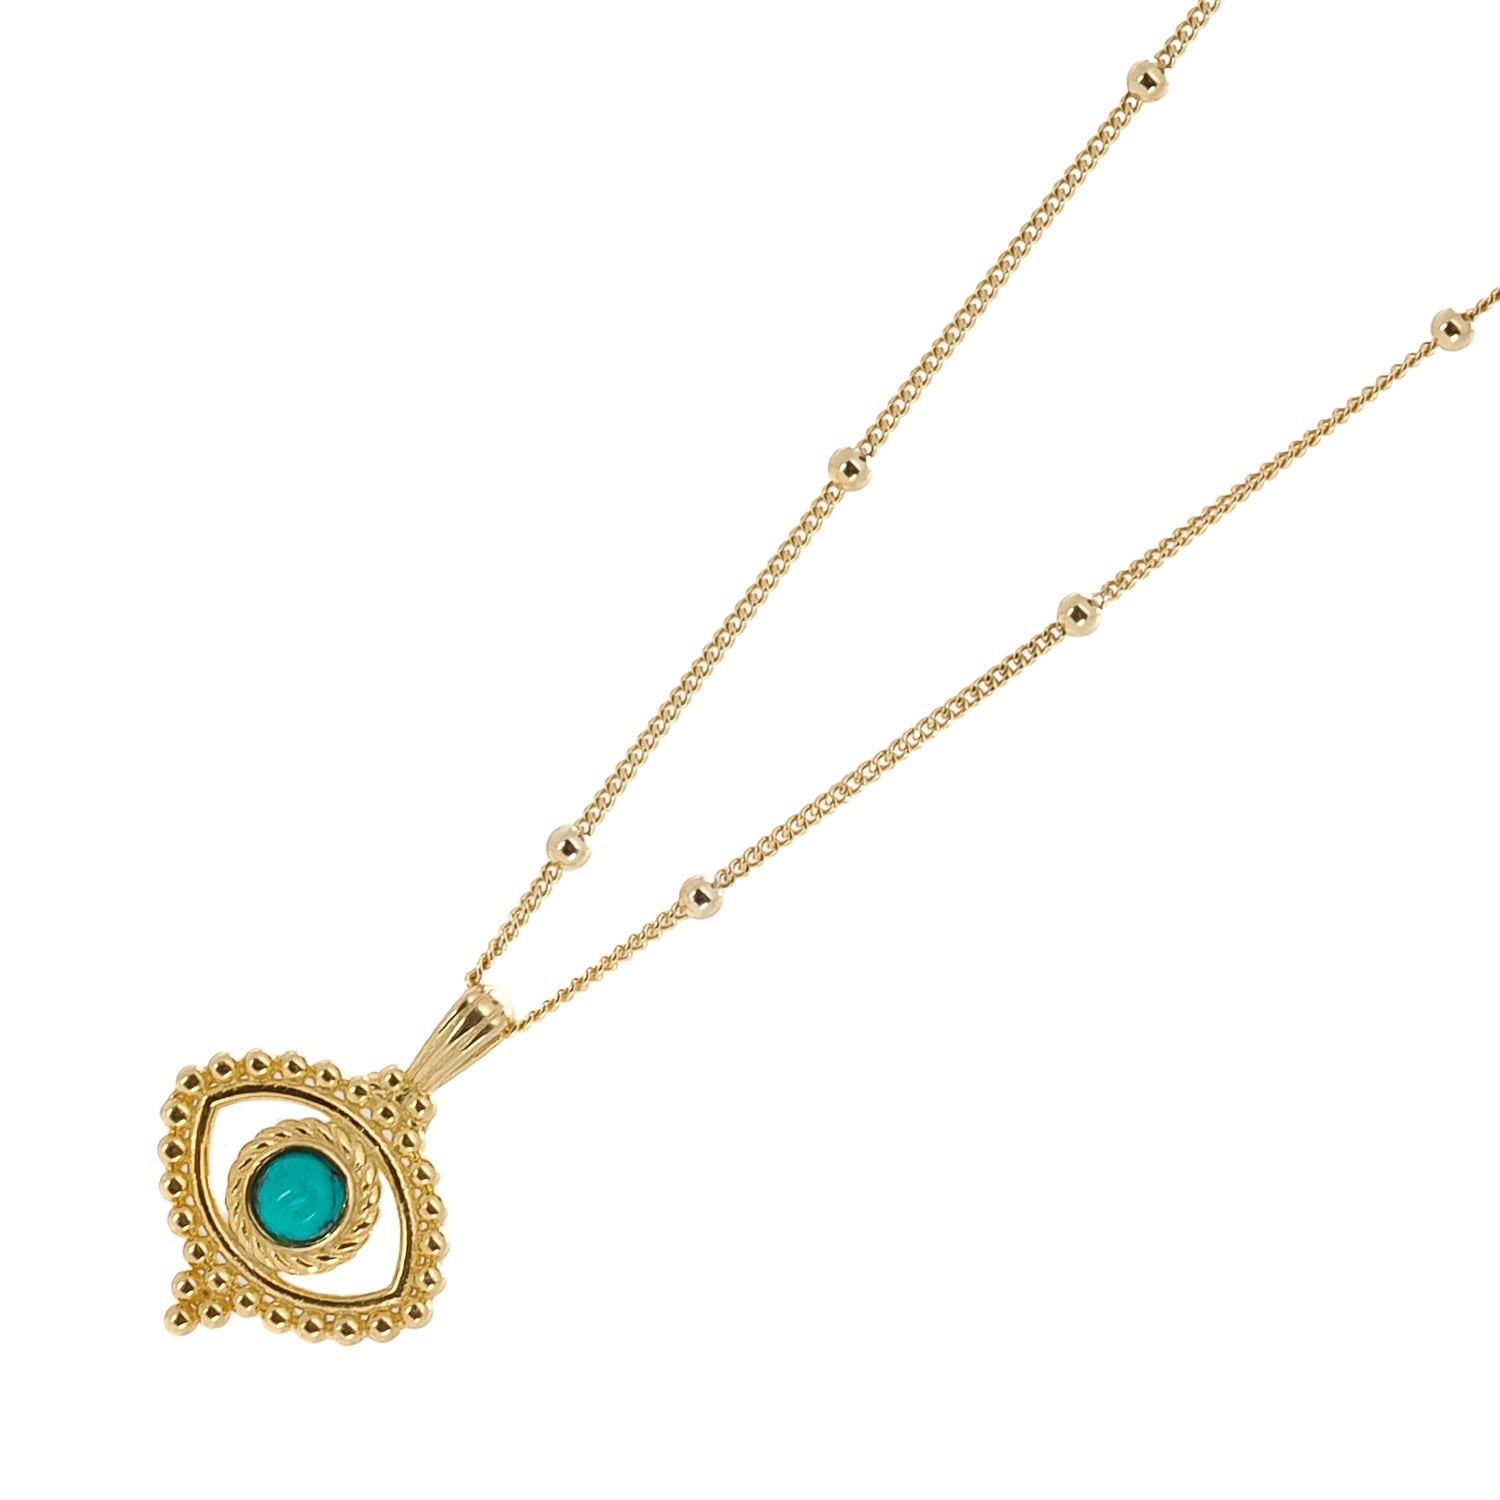 Fashionable Protection: Model Wearing Stylish Gold Chain Evil Eye Necklace